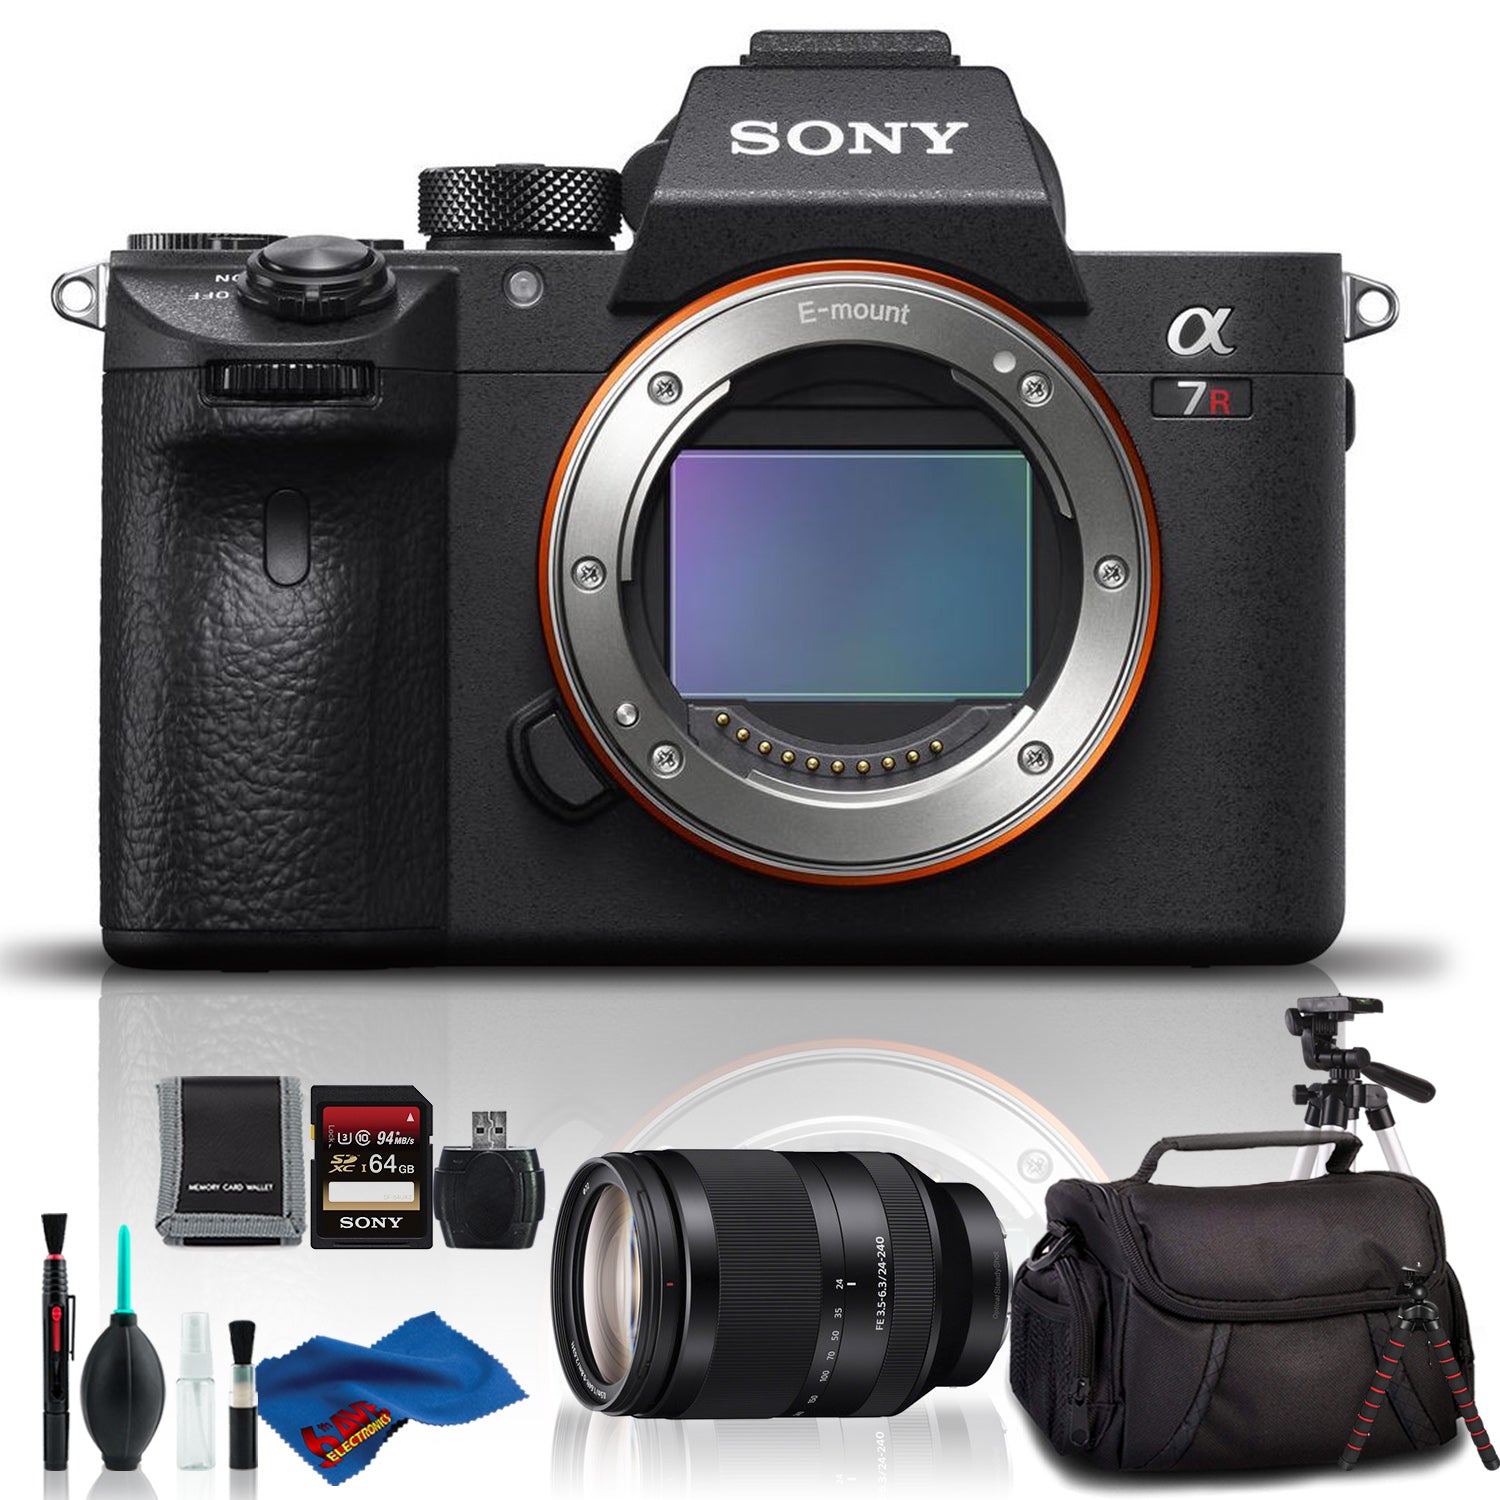 Sony Alpha a7R III Mirrorless Digital Camera with 24-240mm Lens - Deluxe Kit